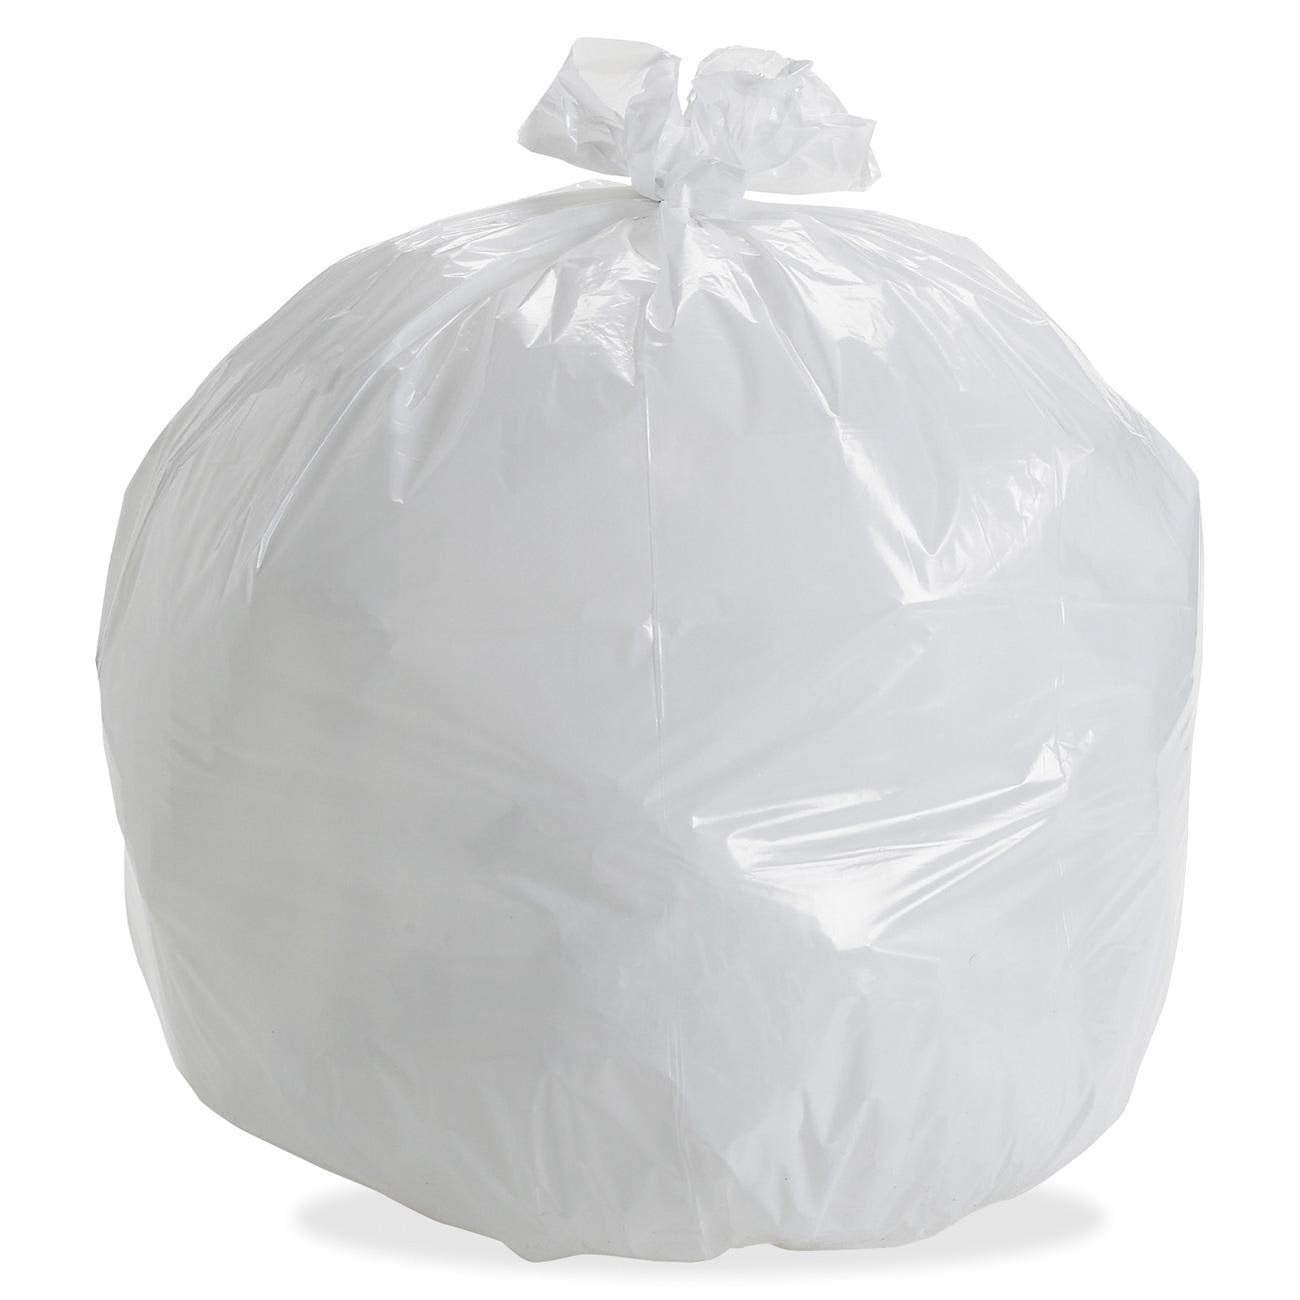 10 Jumbo Size Clear Plastic Bags 36x60 / 2 Mil VERY LARGE Bags 36